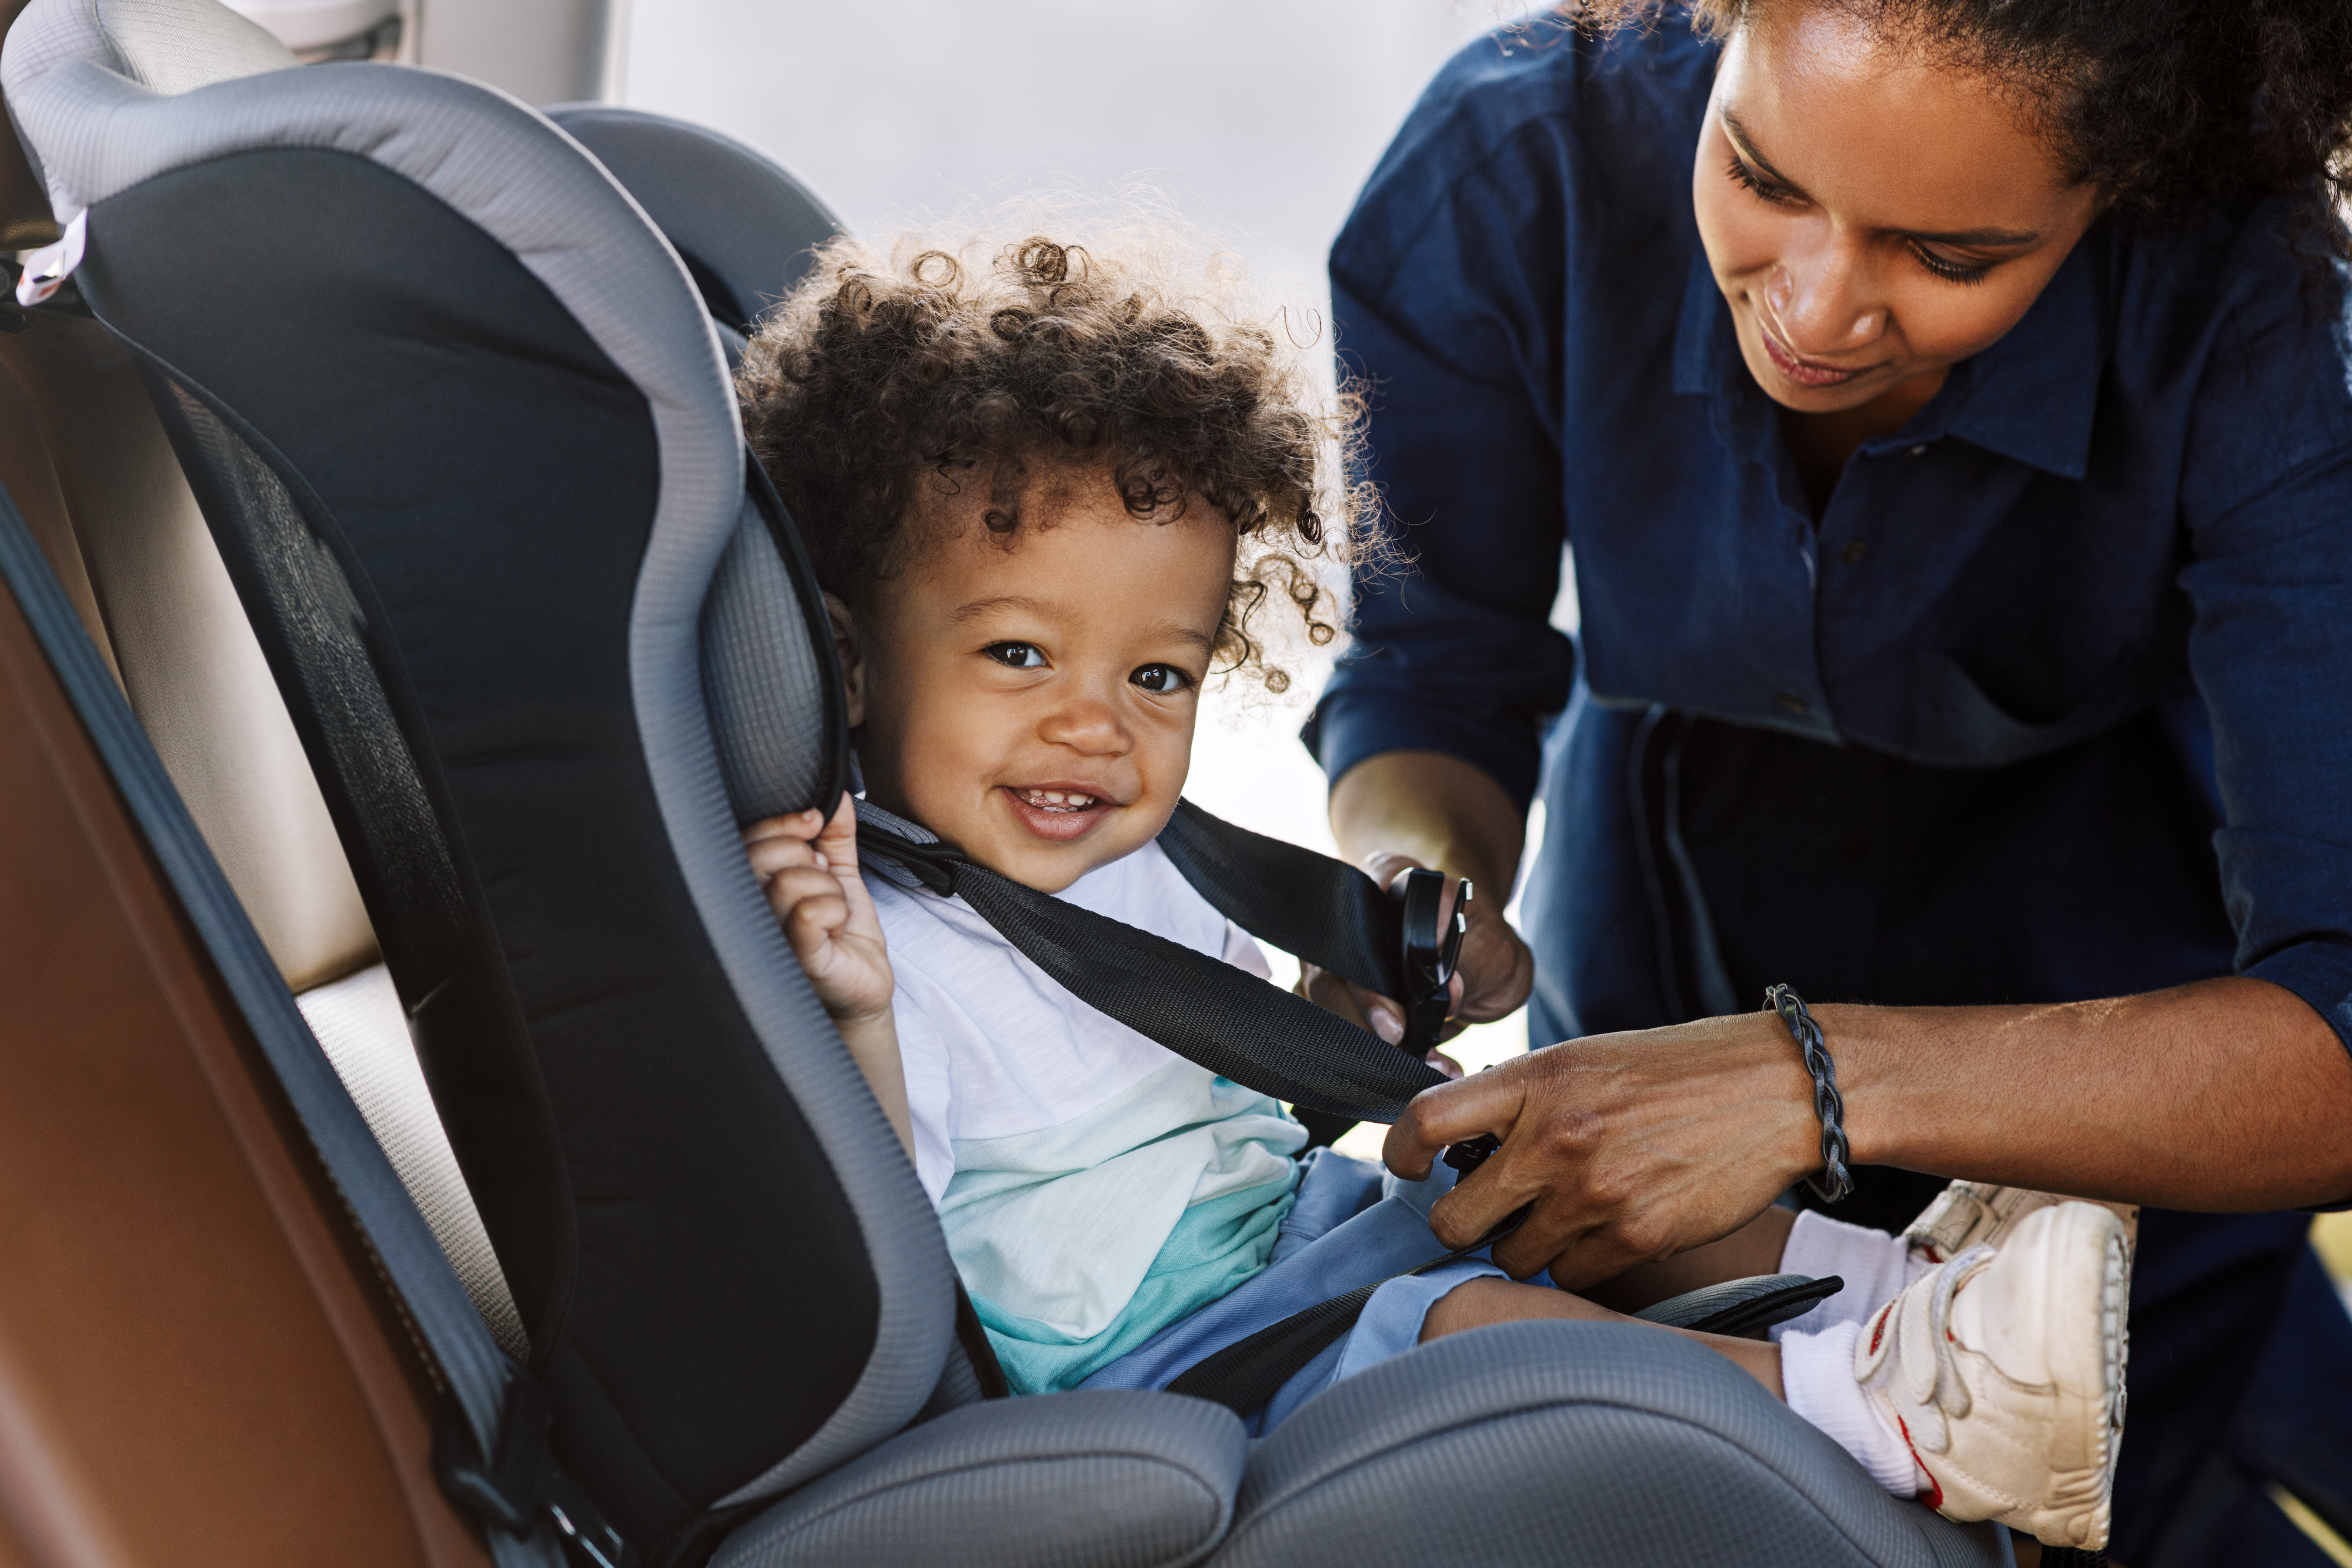 Mother strapping her child to a car seat | Source: Shutterstock